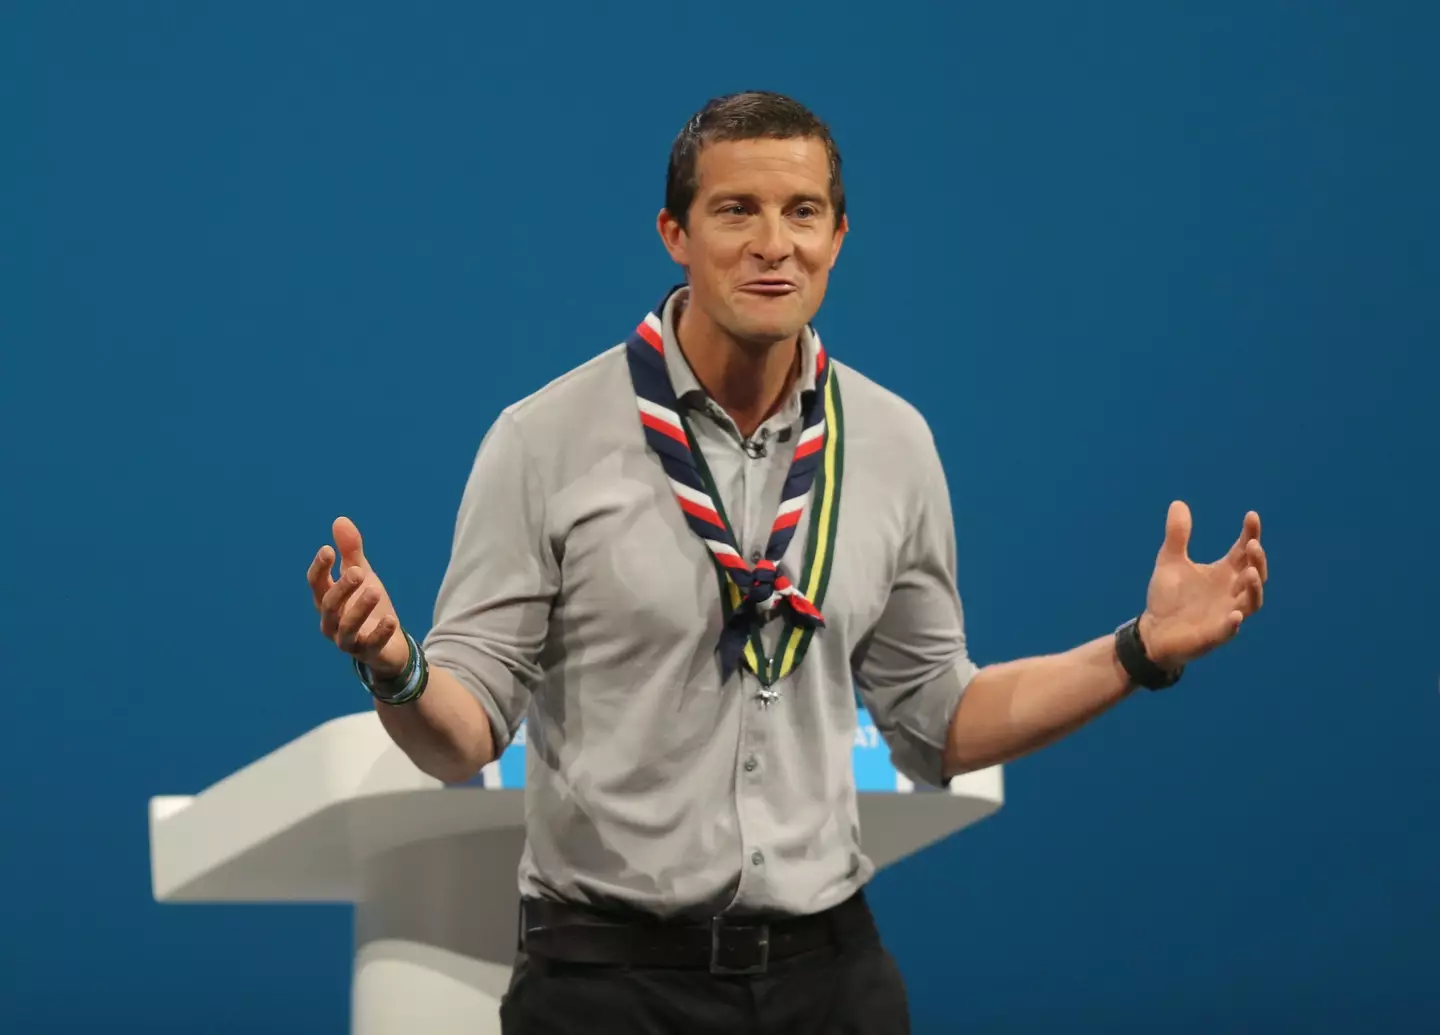 Grylls also advocates positively reframing how we view rain.